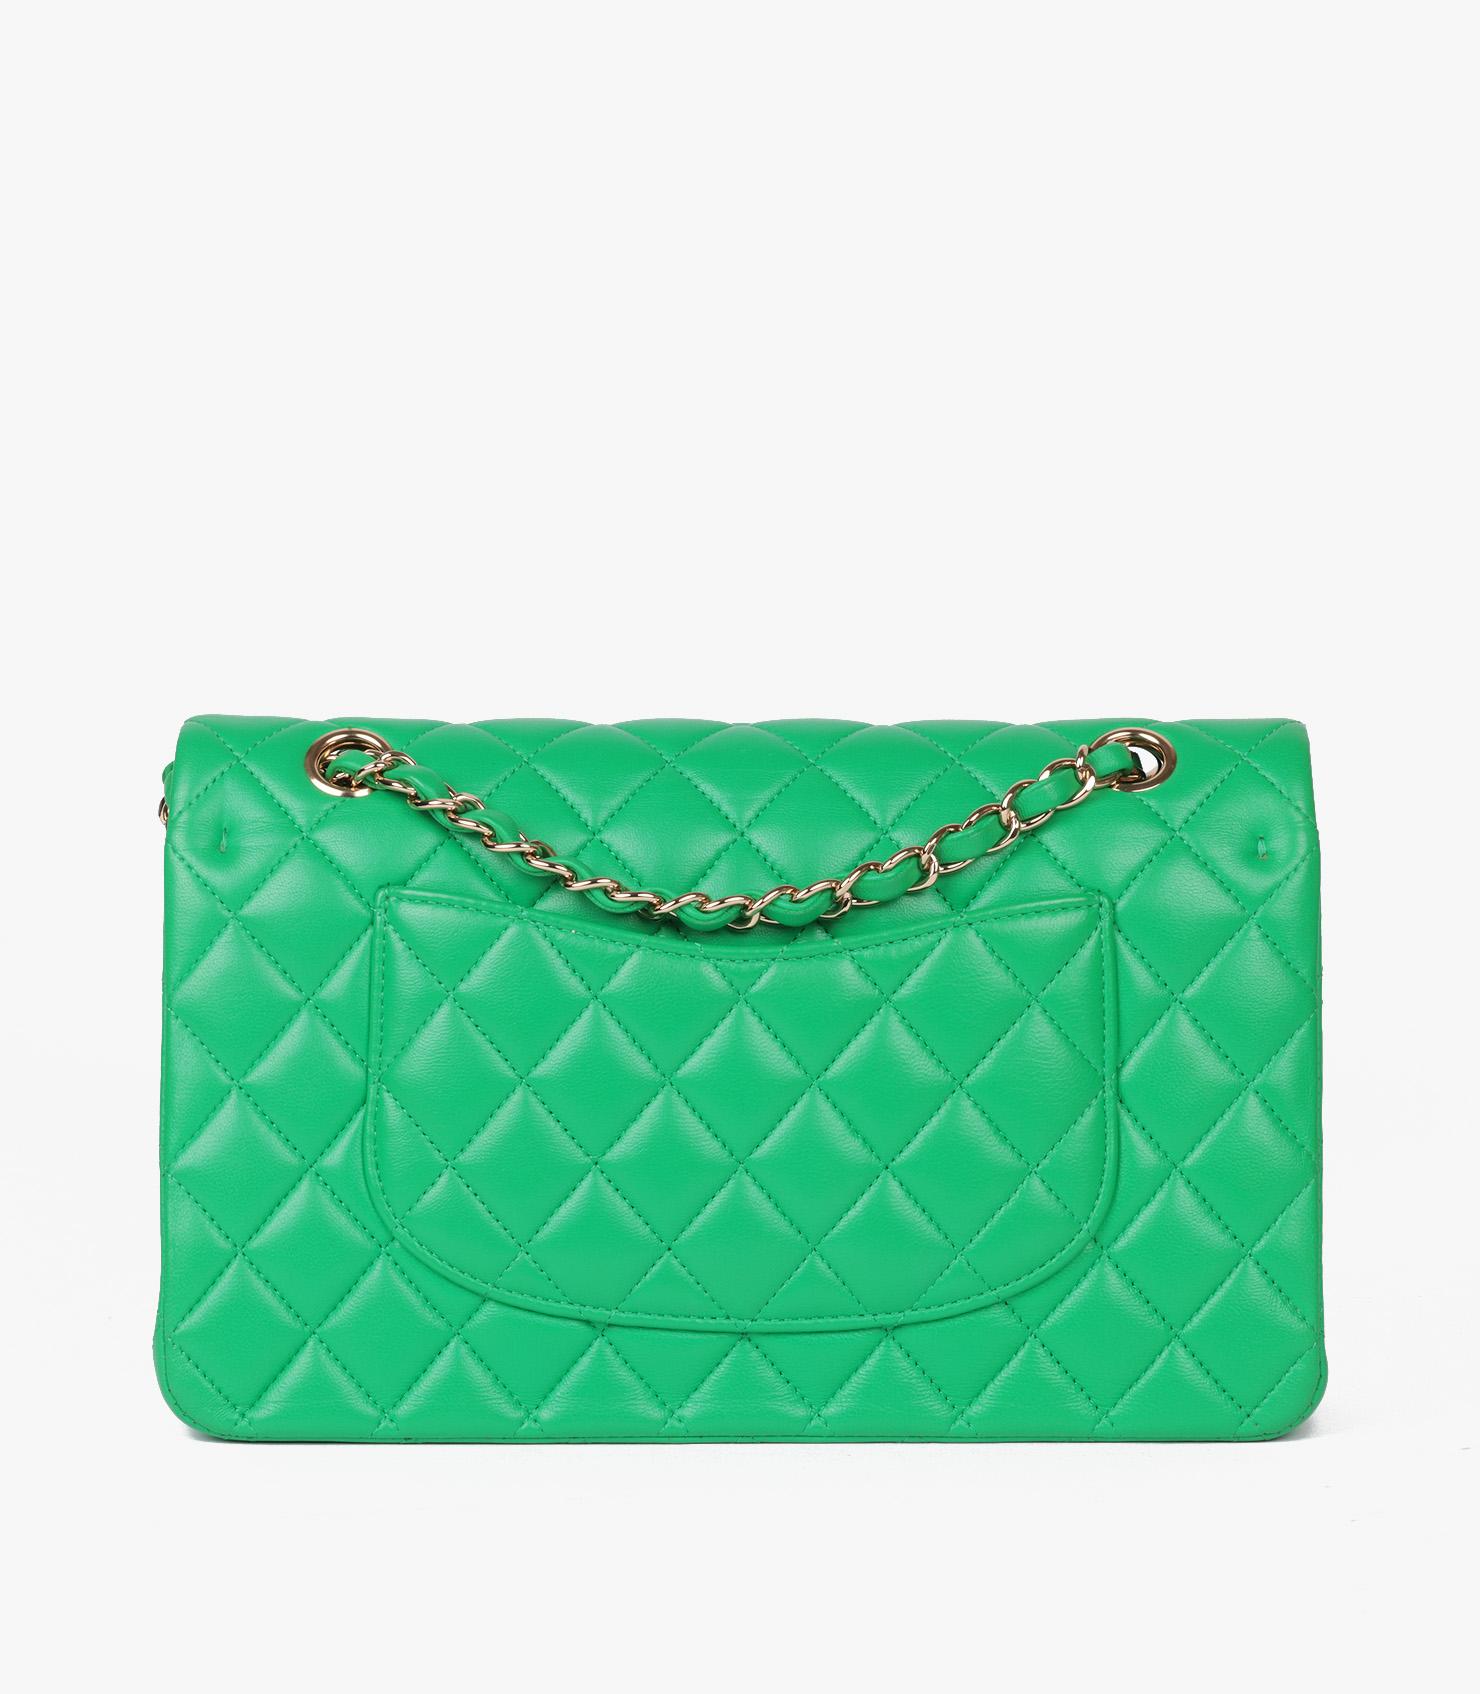 Chanel Green Quilted Lambskin Medium Classic Double Flap Bag 2